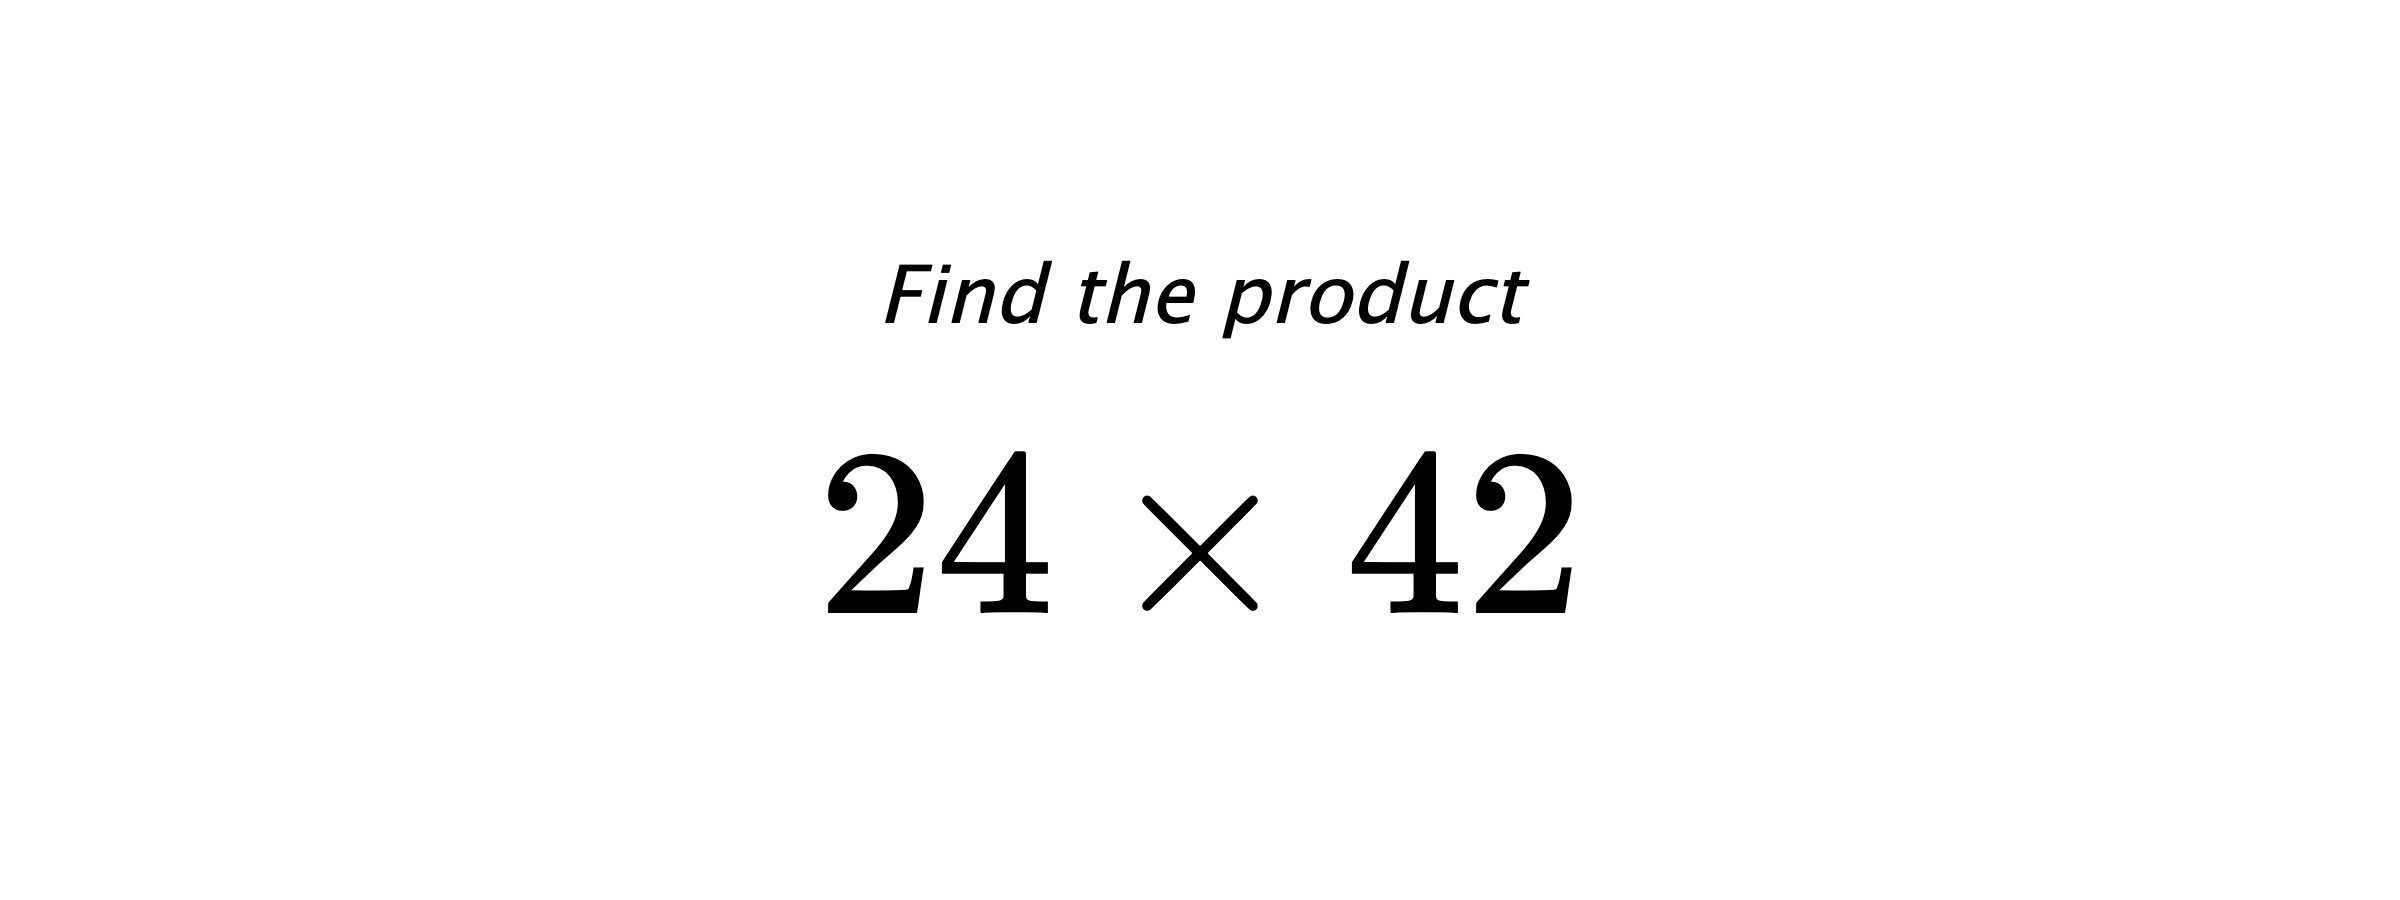 Find the product $ 24 \times 42 $